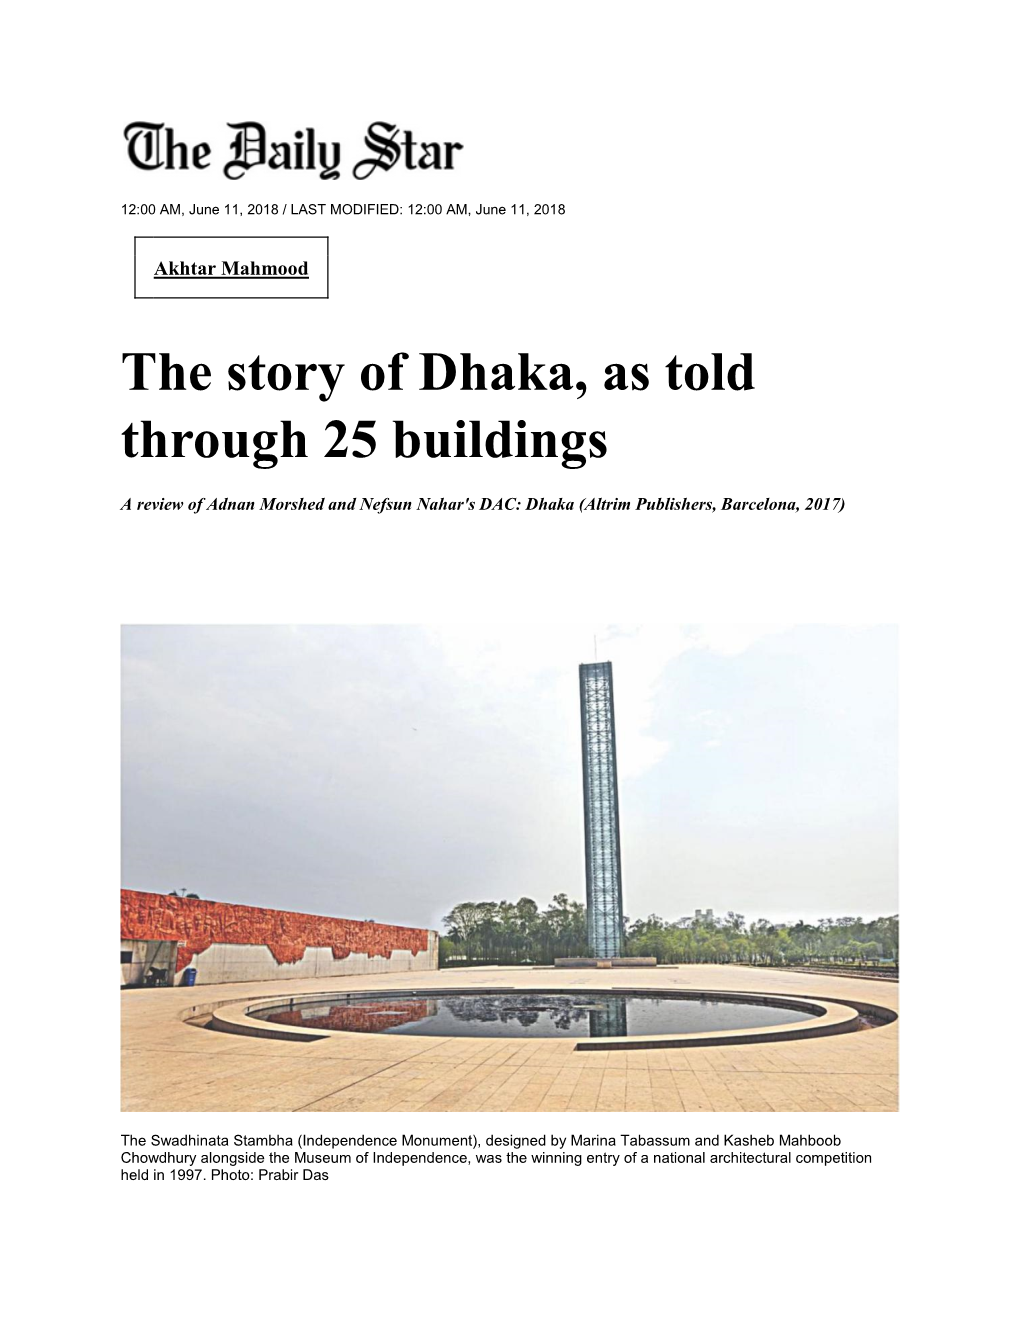 The Story of Dhaka, As Told Through 25 Buildings